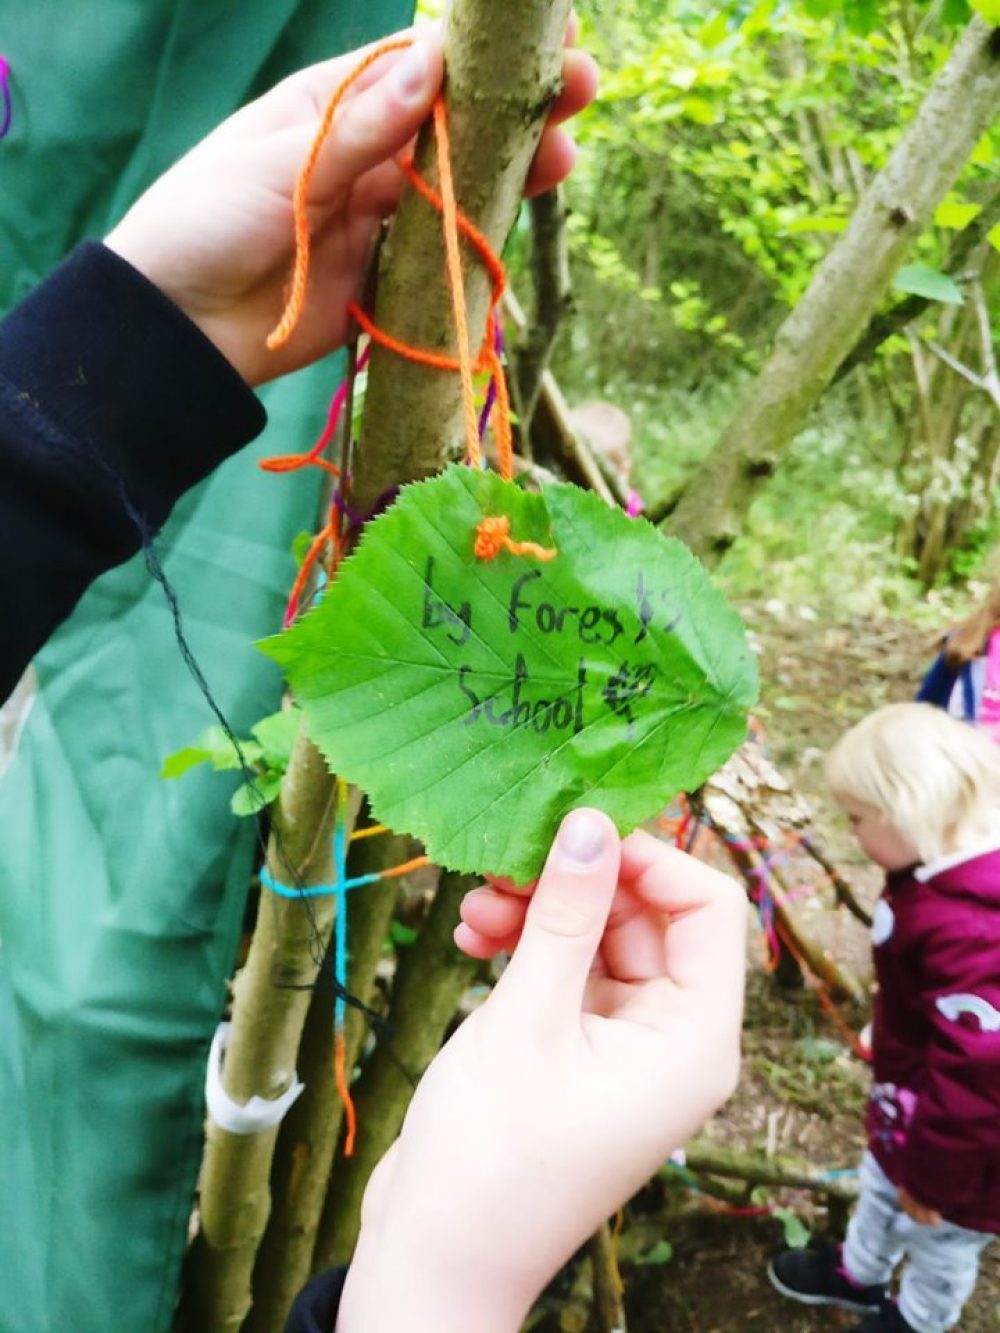 By Forest School